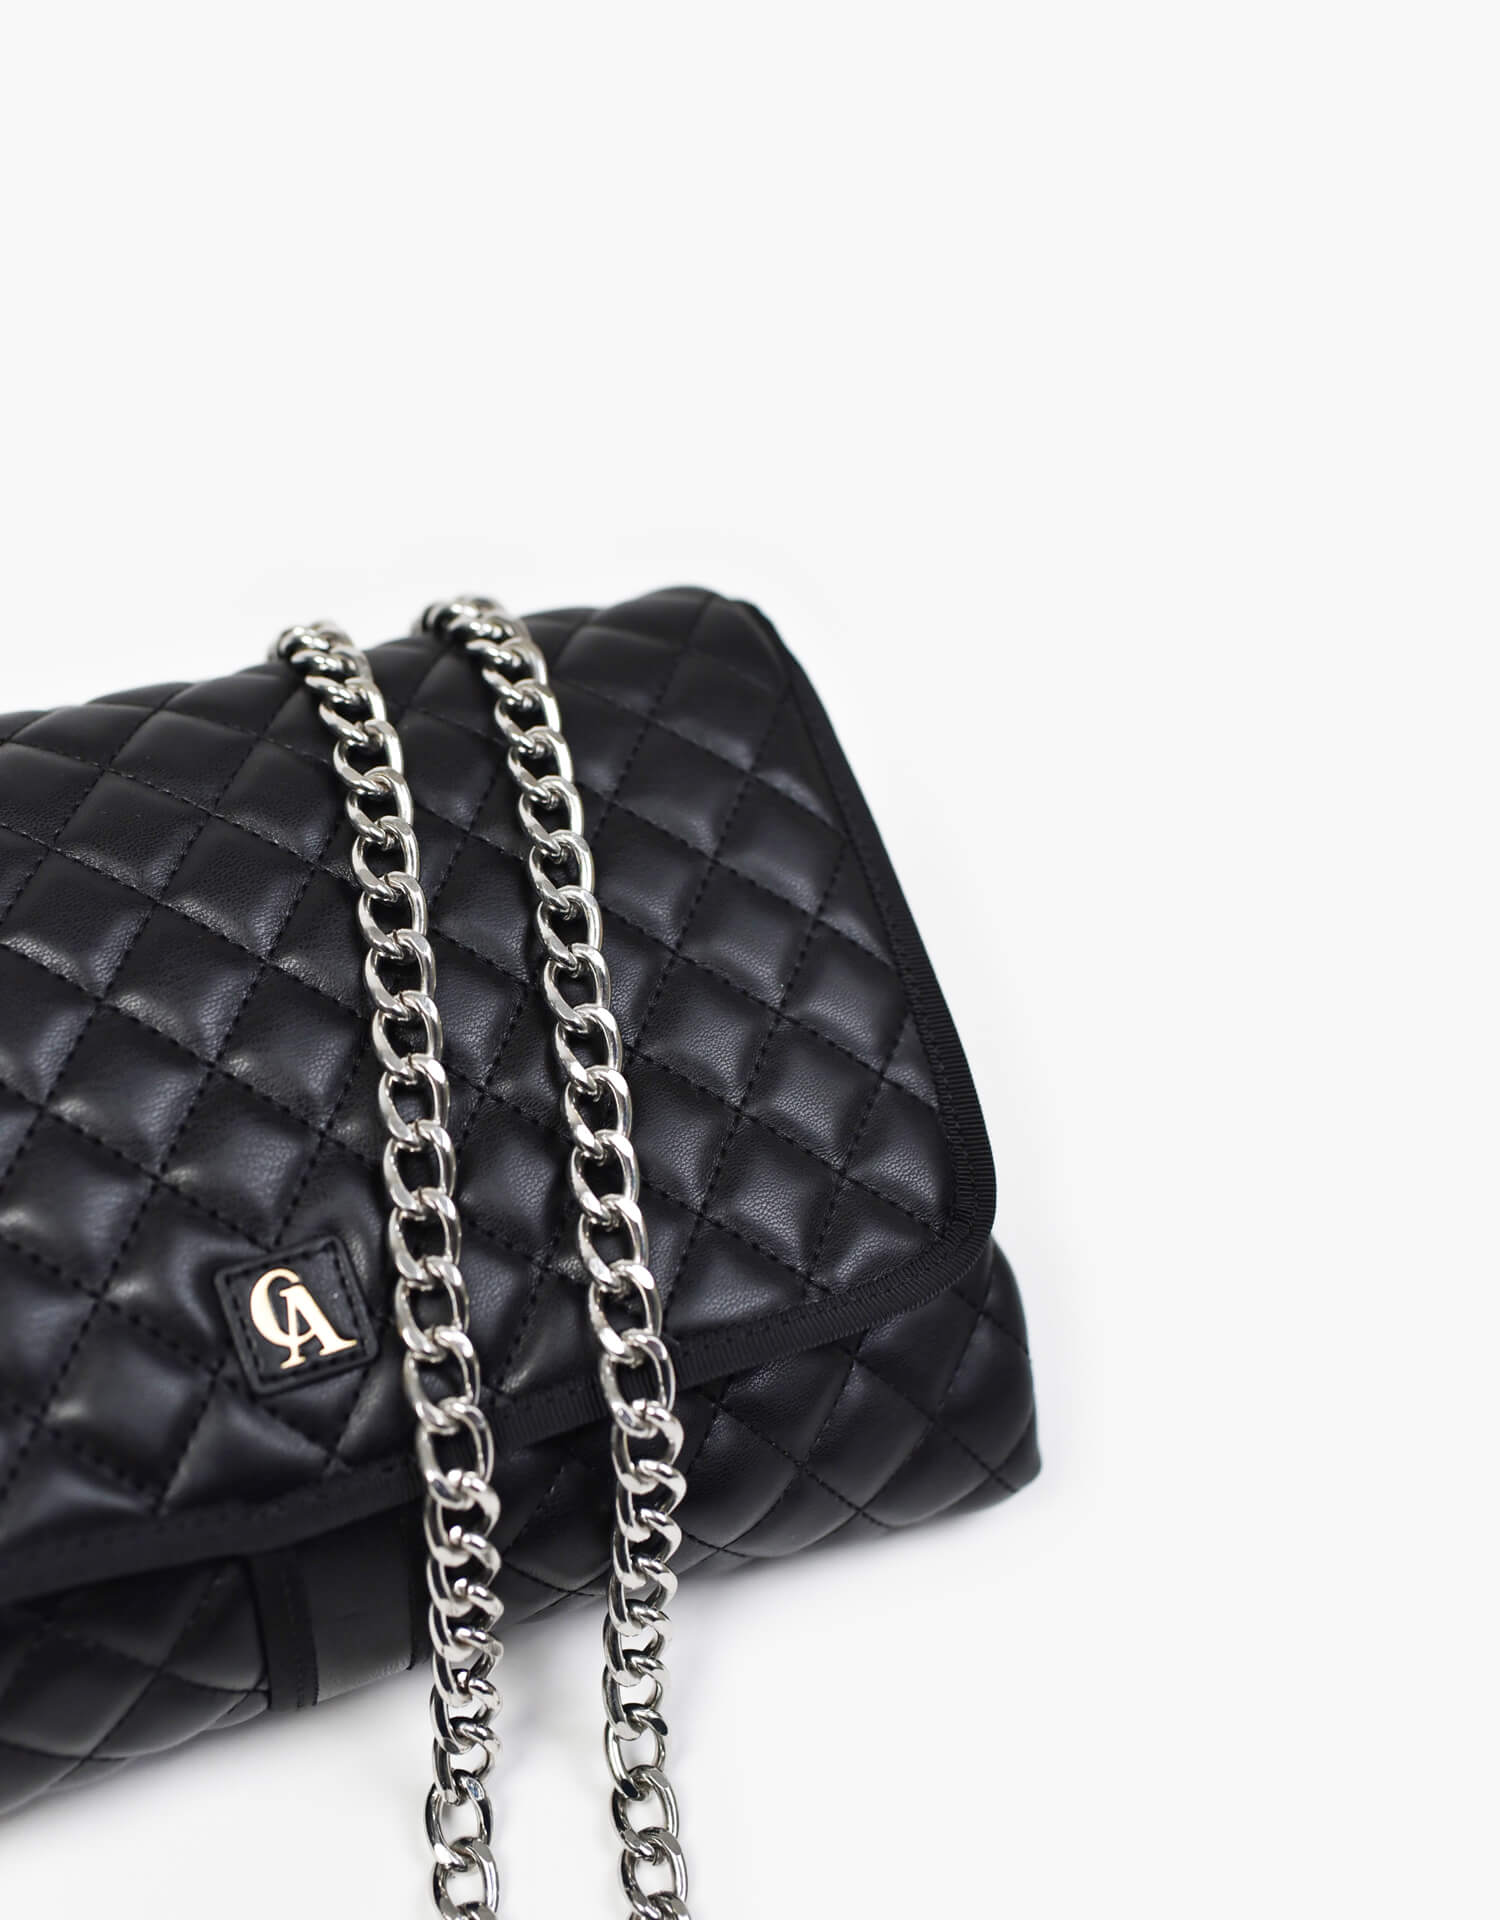 Which way do you wear your Chanel WOC chain? Regular or wrap